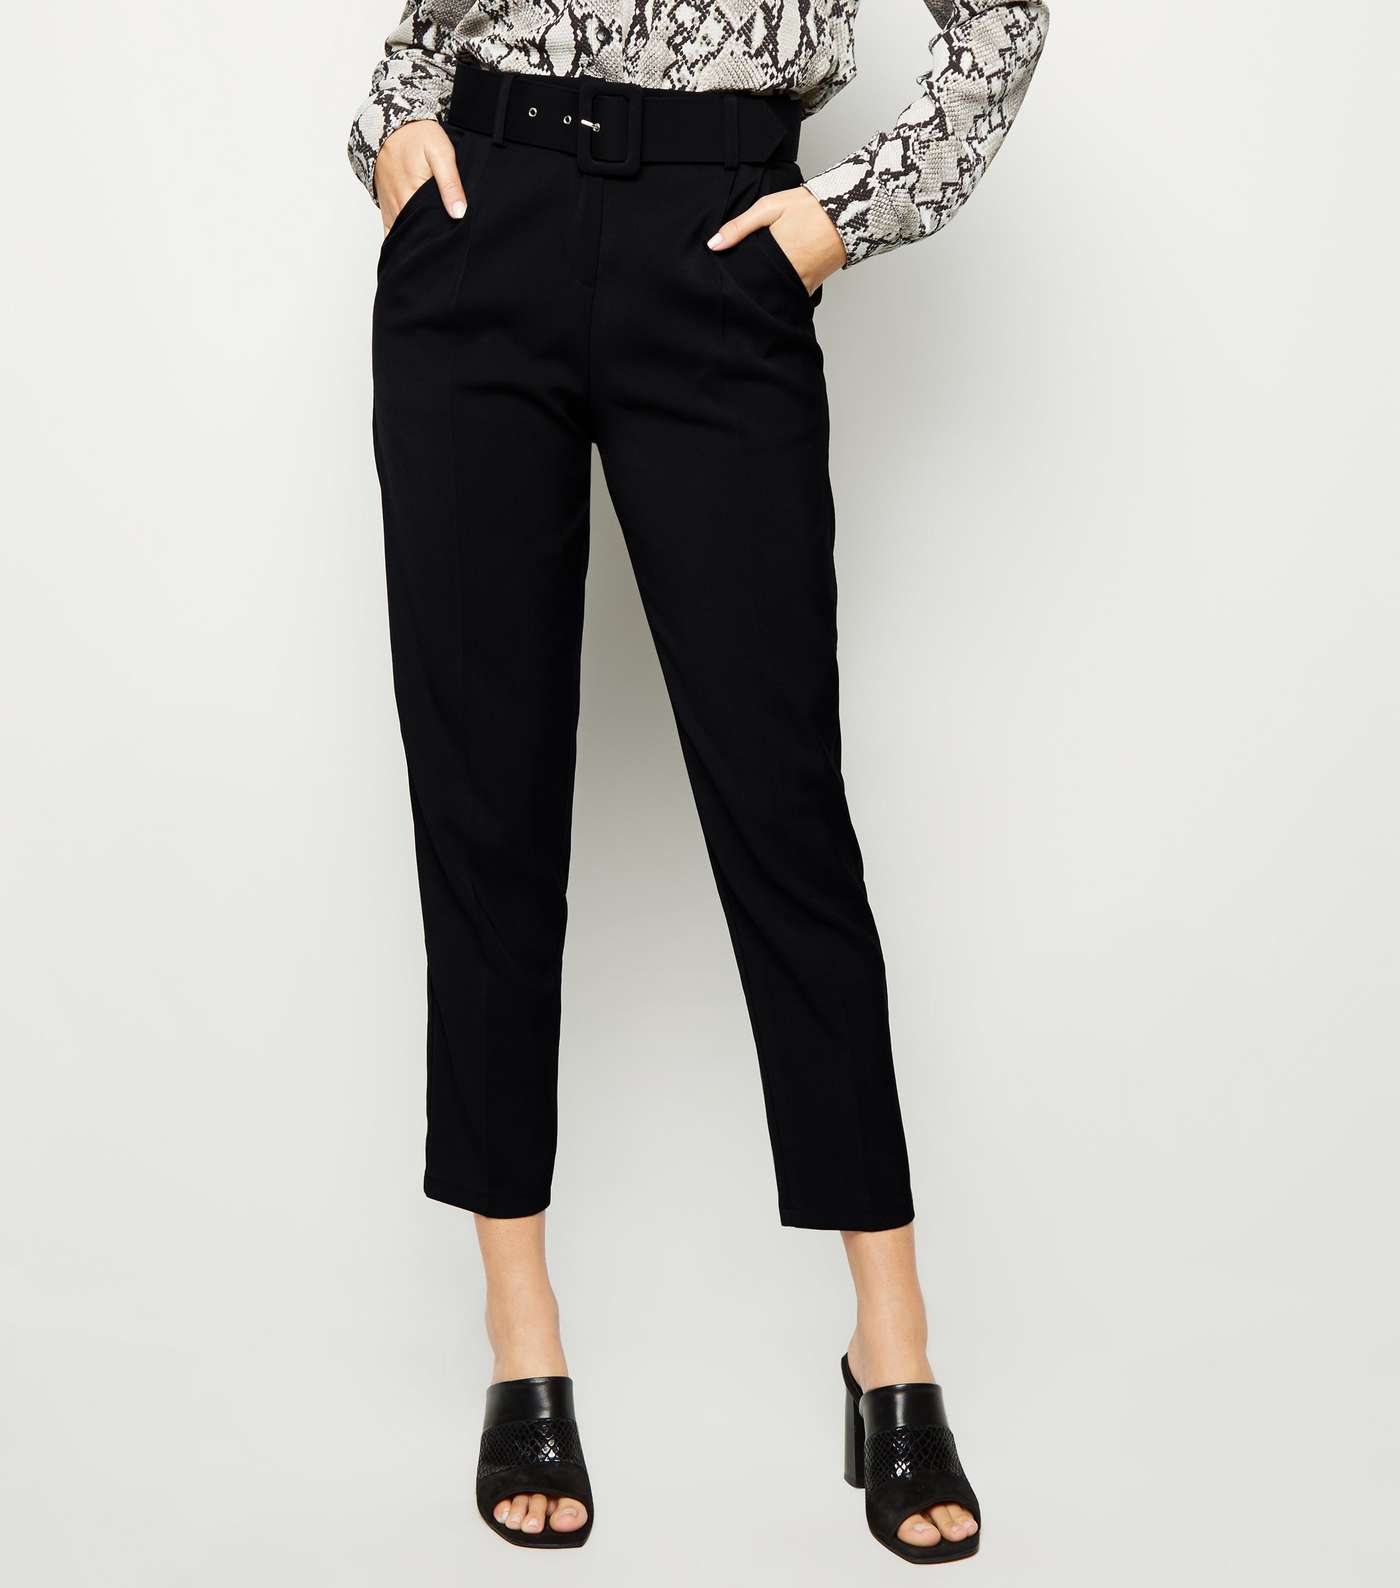 Cameo Black Belted Slim Leg Trousers Image 2